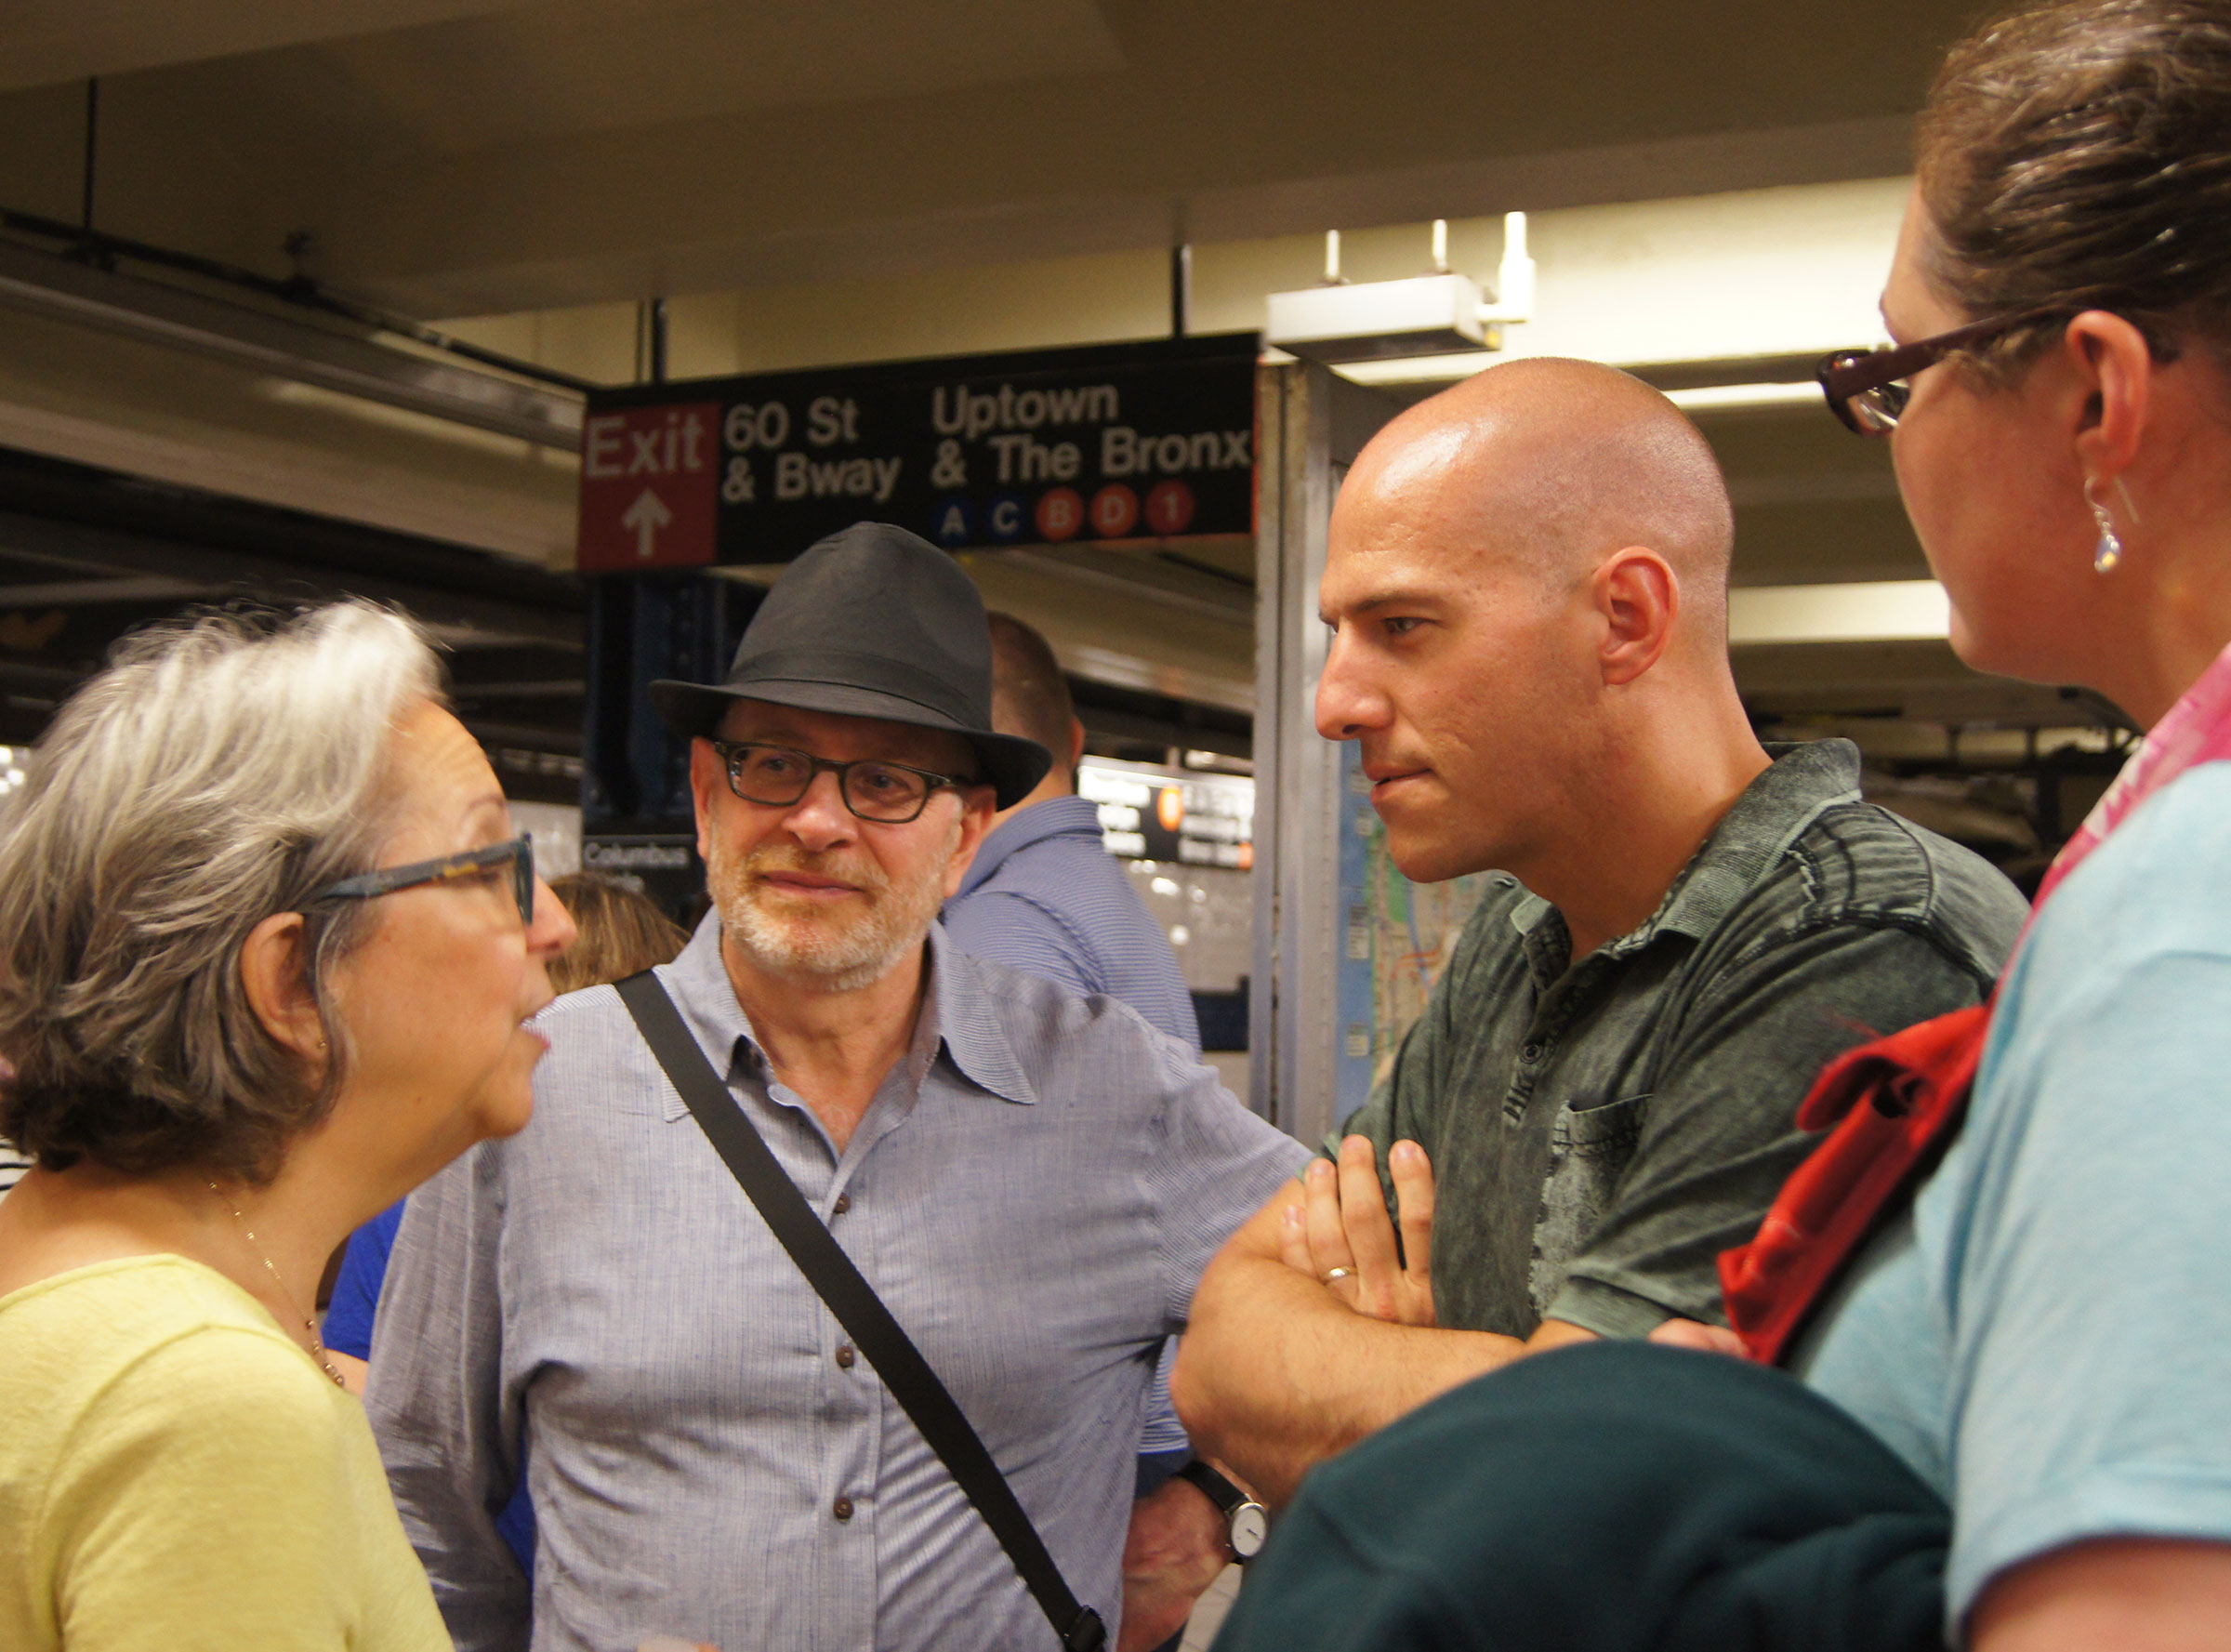 Rabbi Matalon (in hat) with Caleb Follett and other members of the exchange, at a subway stop in New York City. (Amanda Ripley)